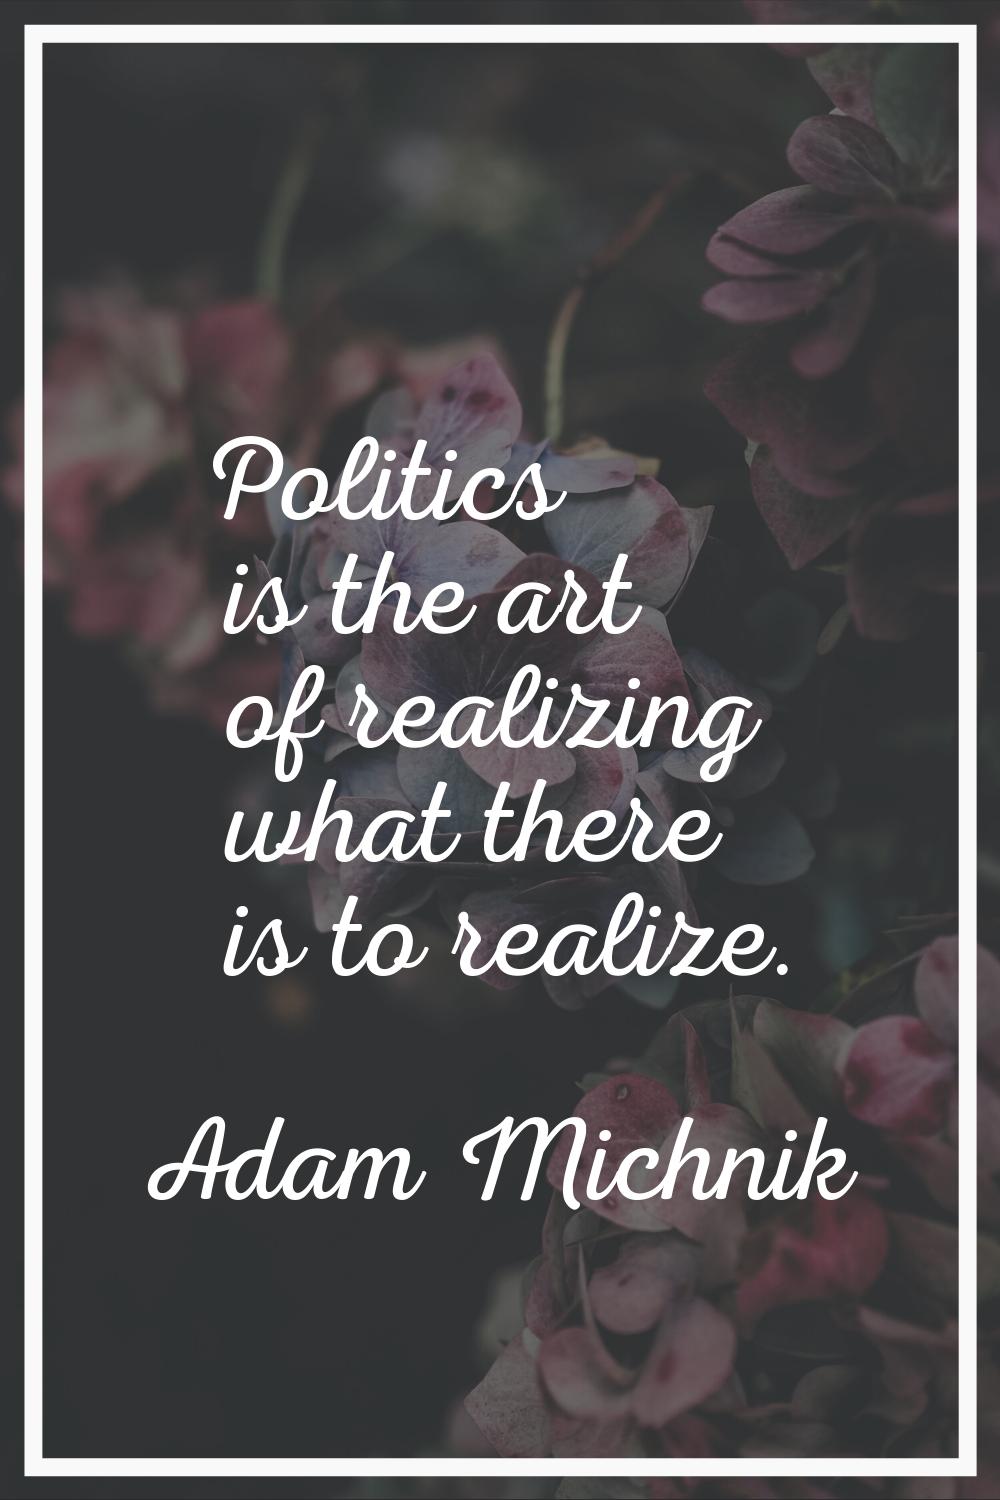 Politics is the art of realizing what there is to realize.